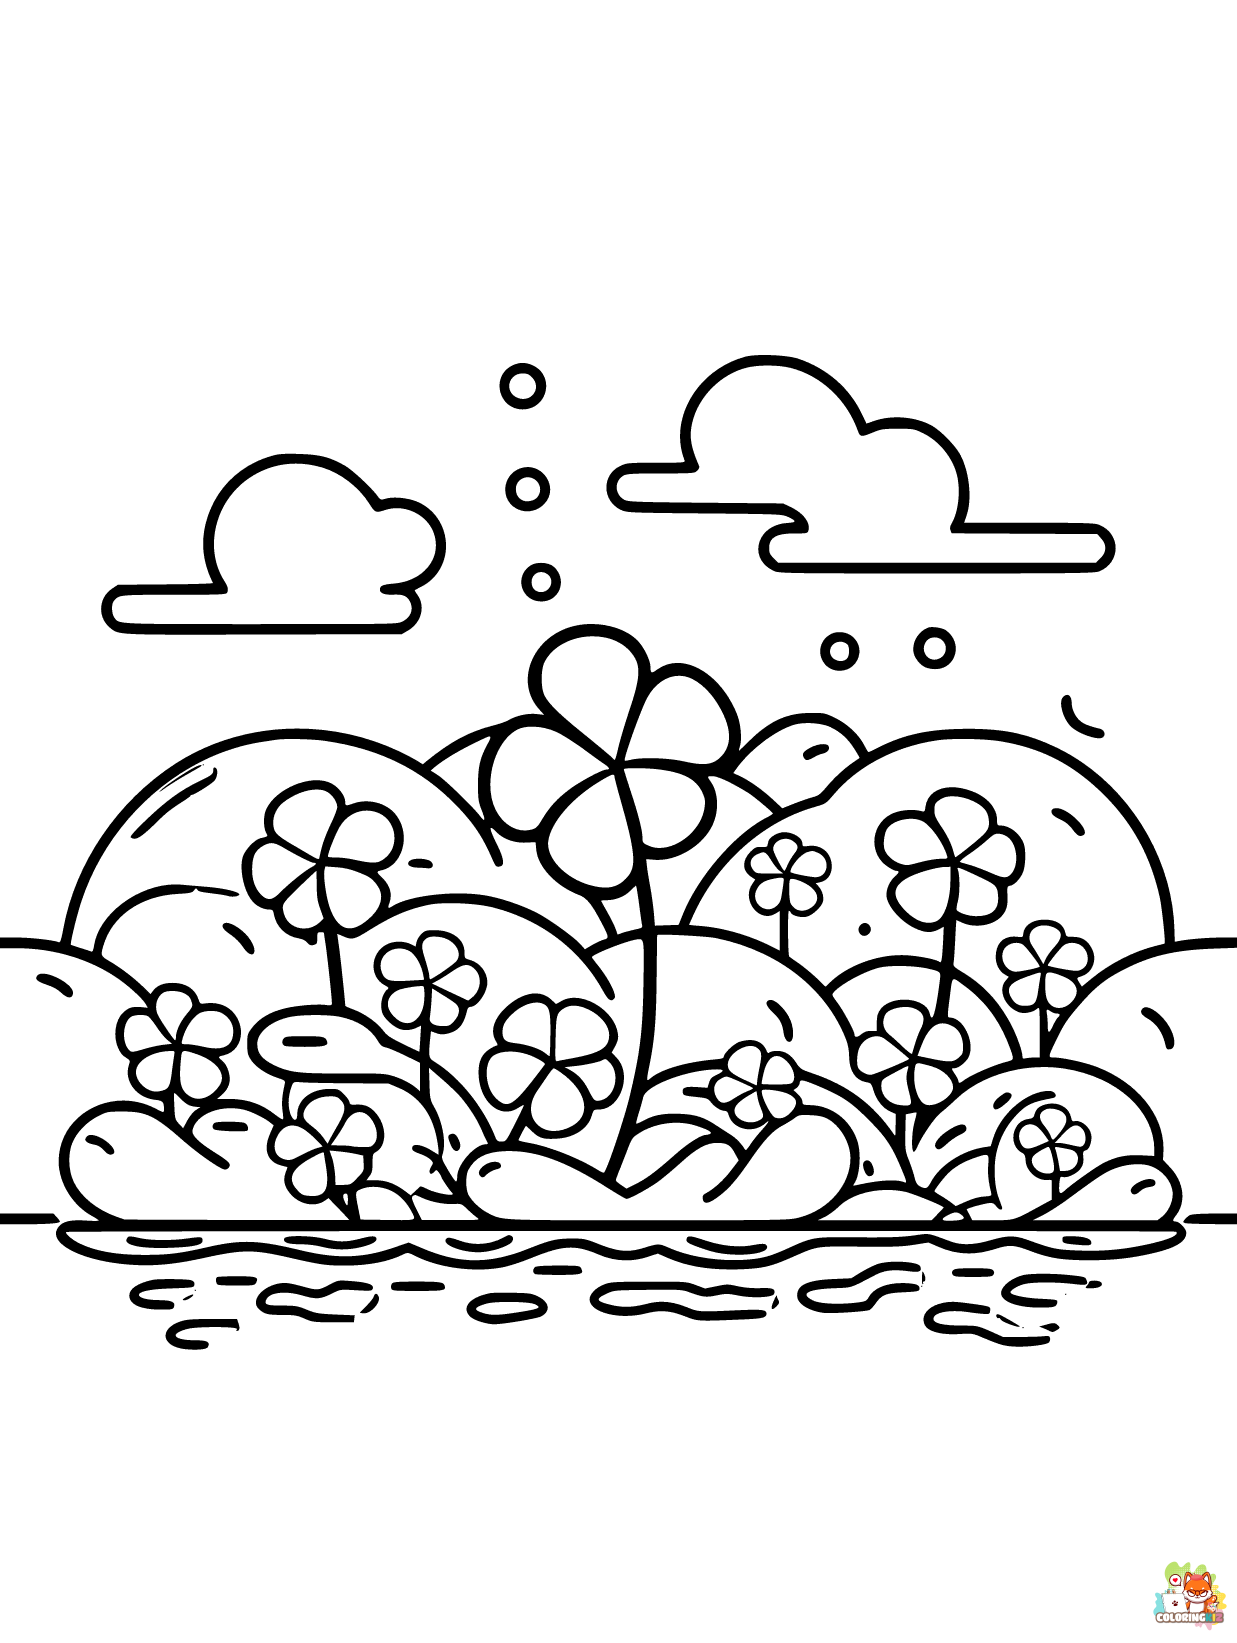 clover coloring pages printable free